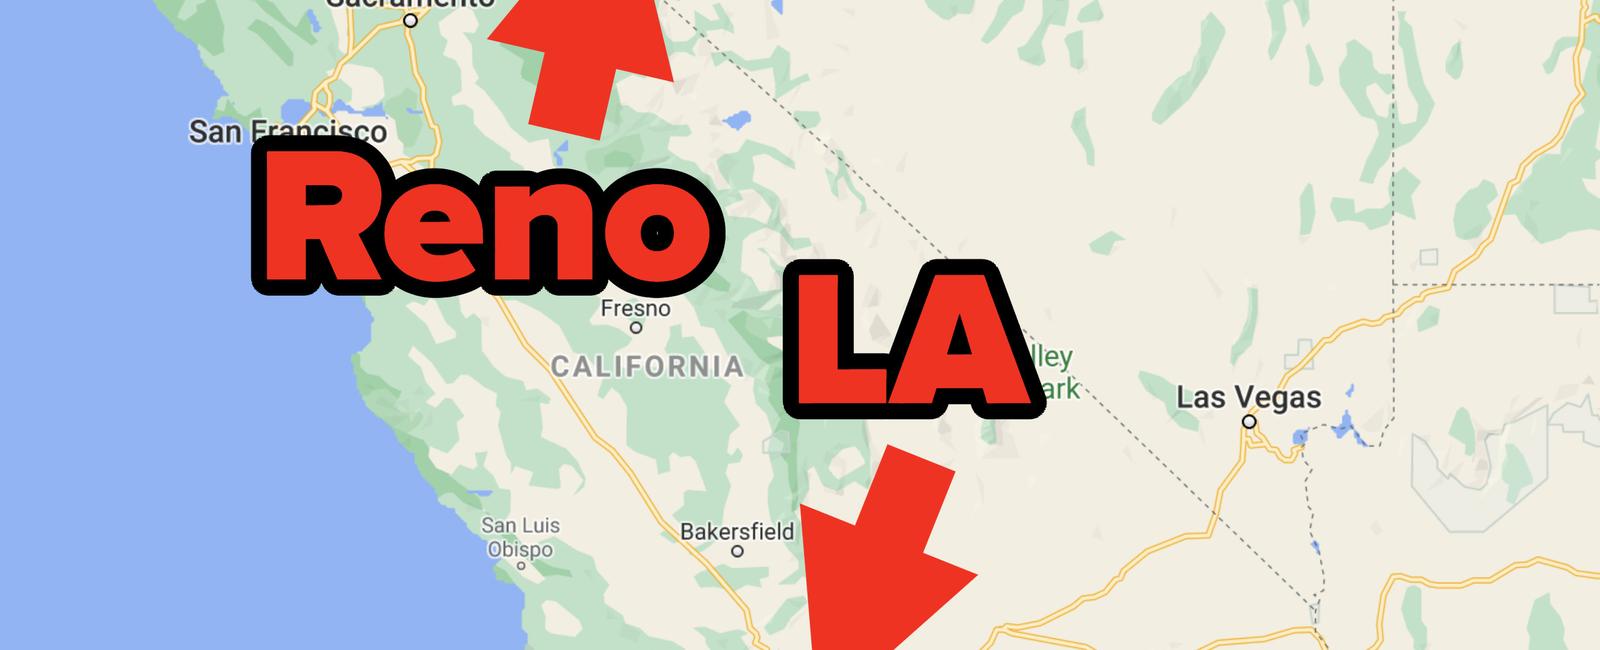 Reno is farther west than los angeles